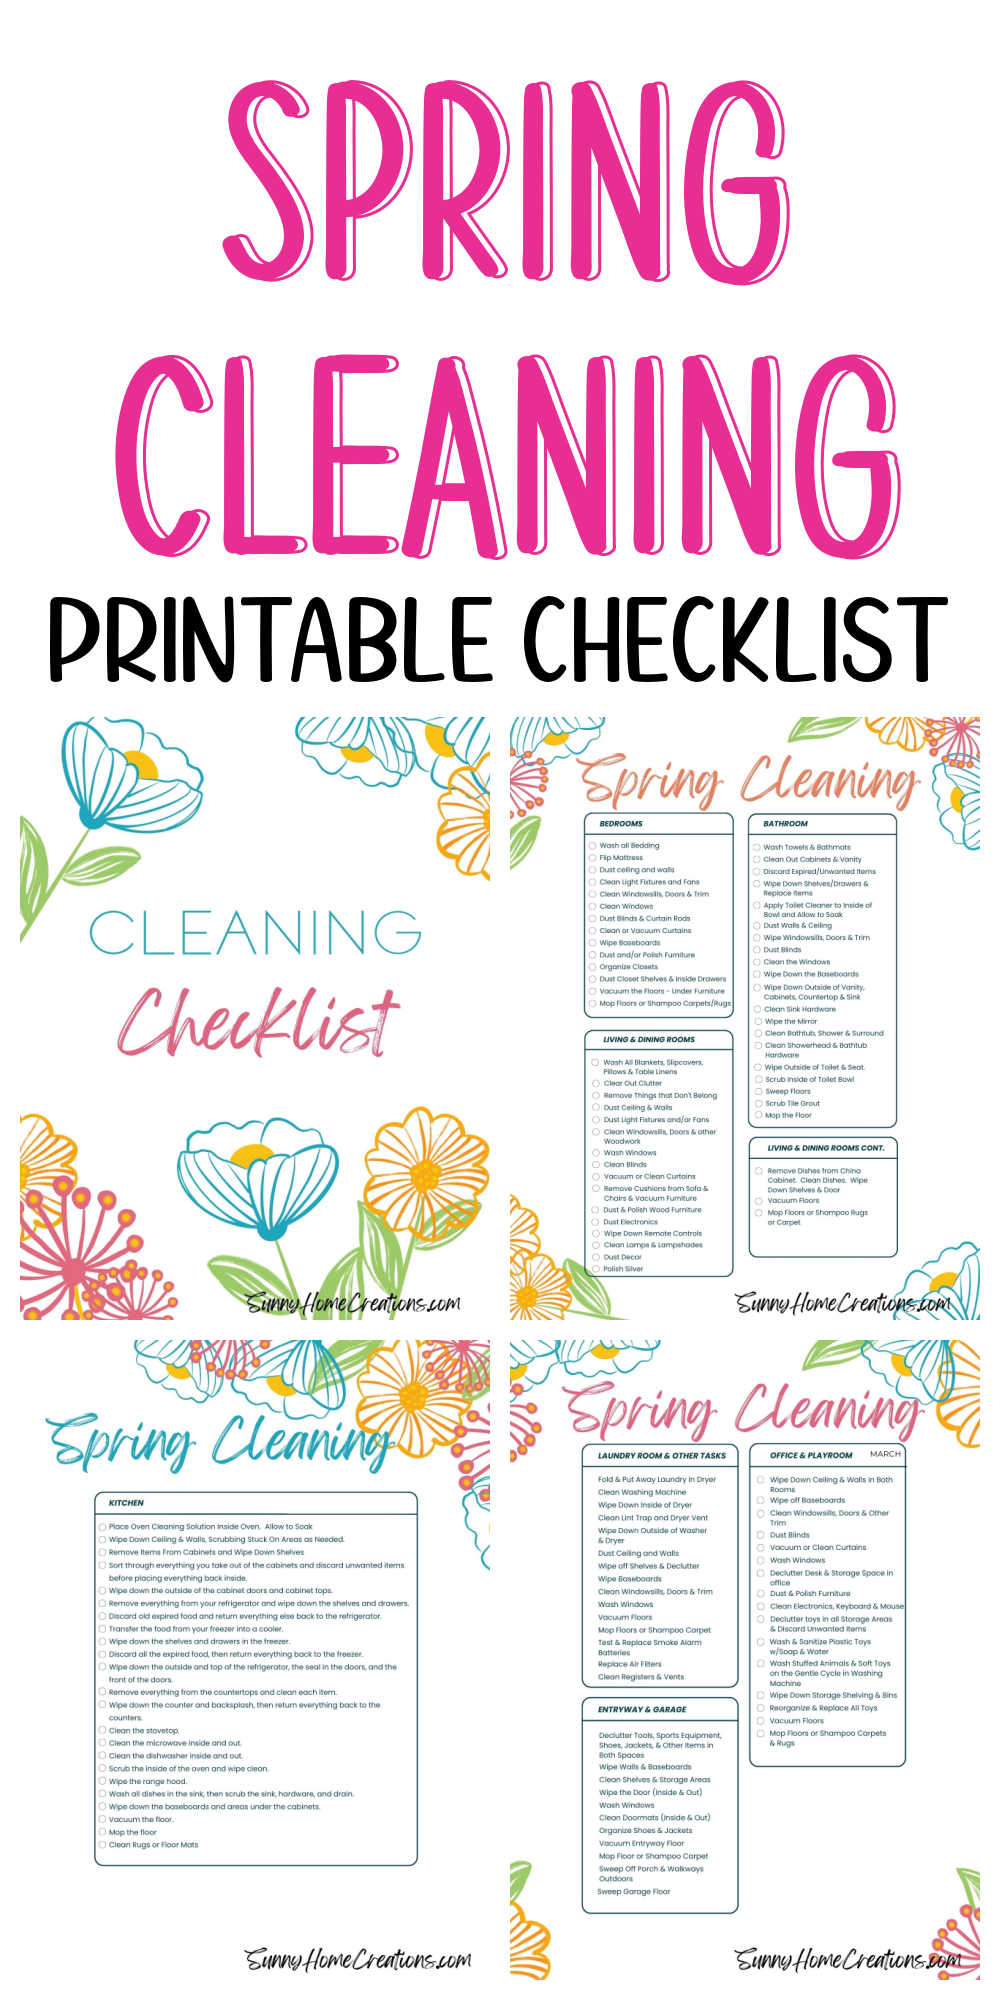 Pin image; top says "Spring Cleaning Printable Checklist" and bottom has a pic of all the pages of the checklist.